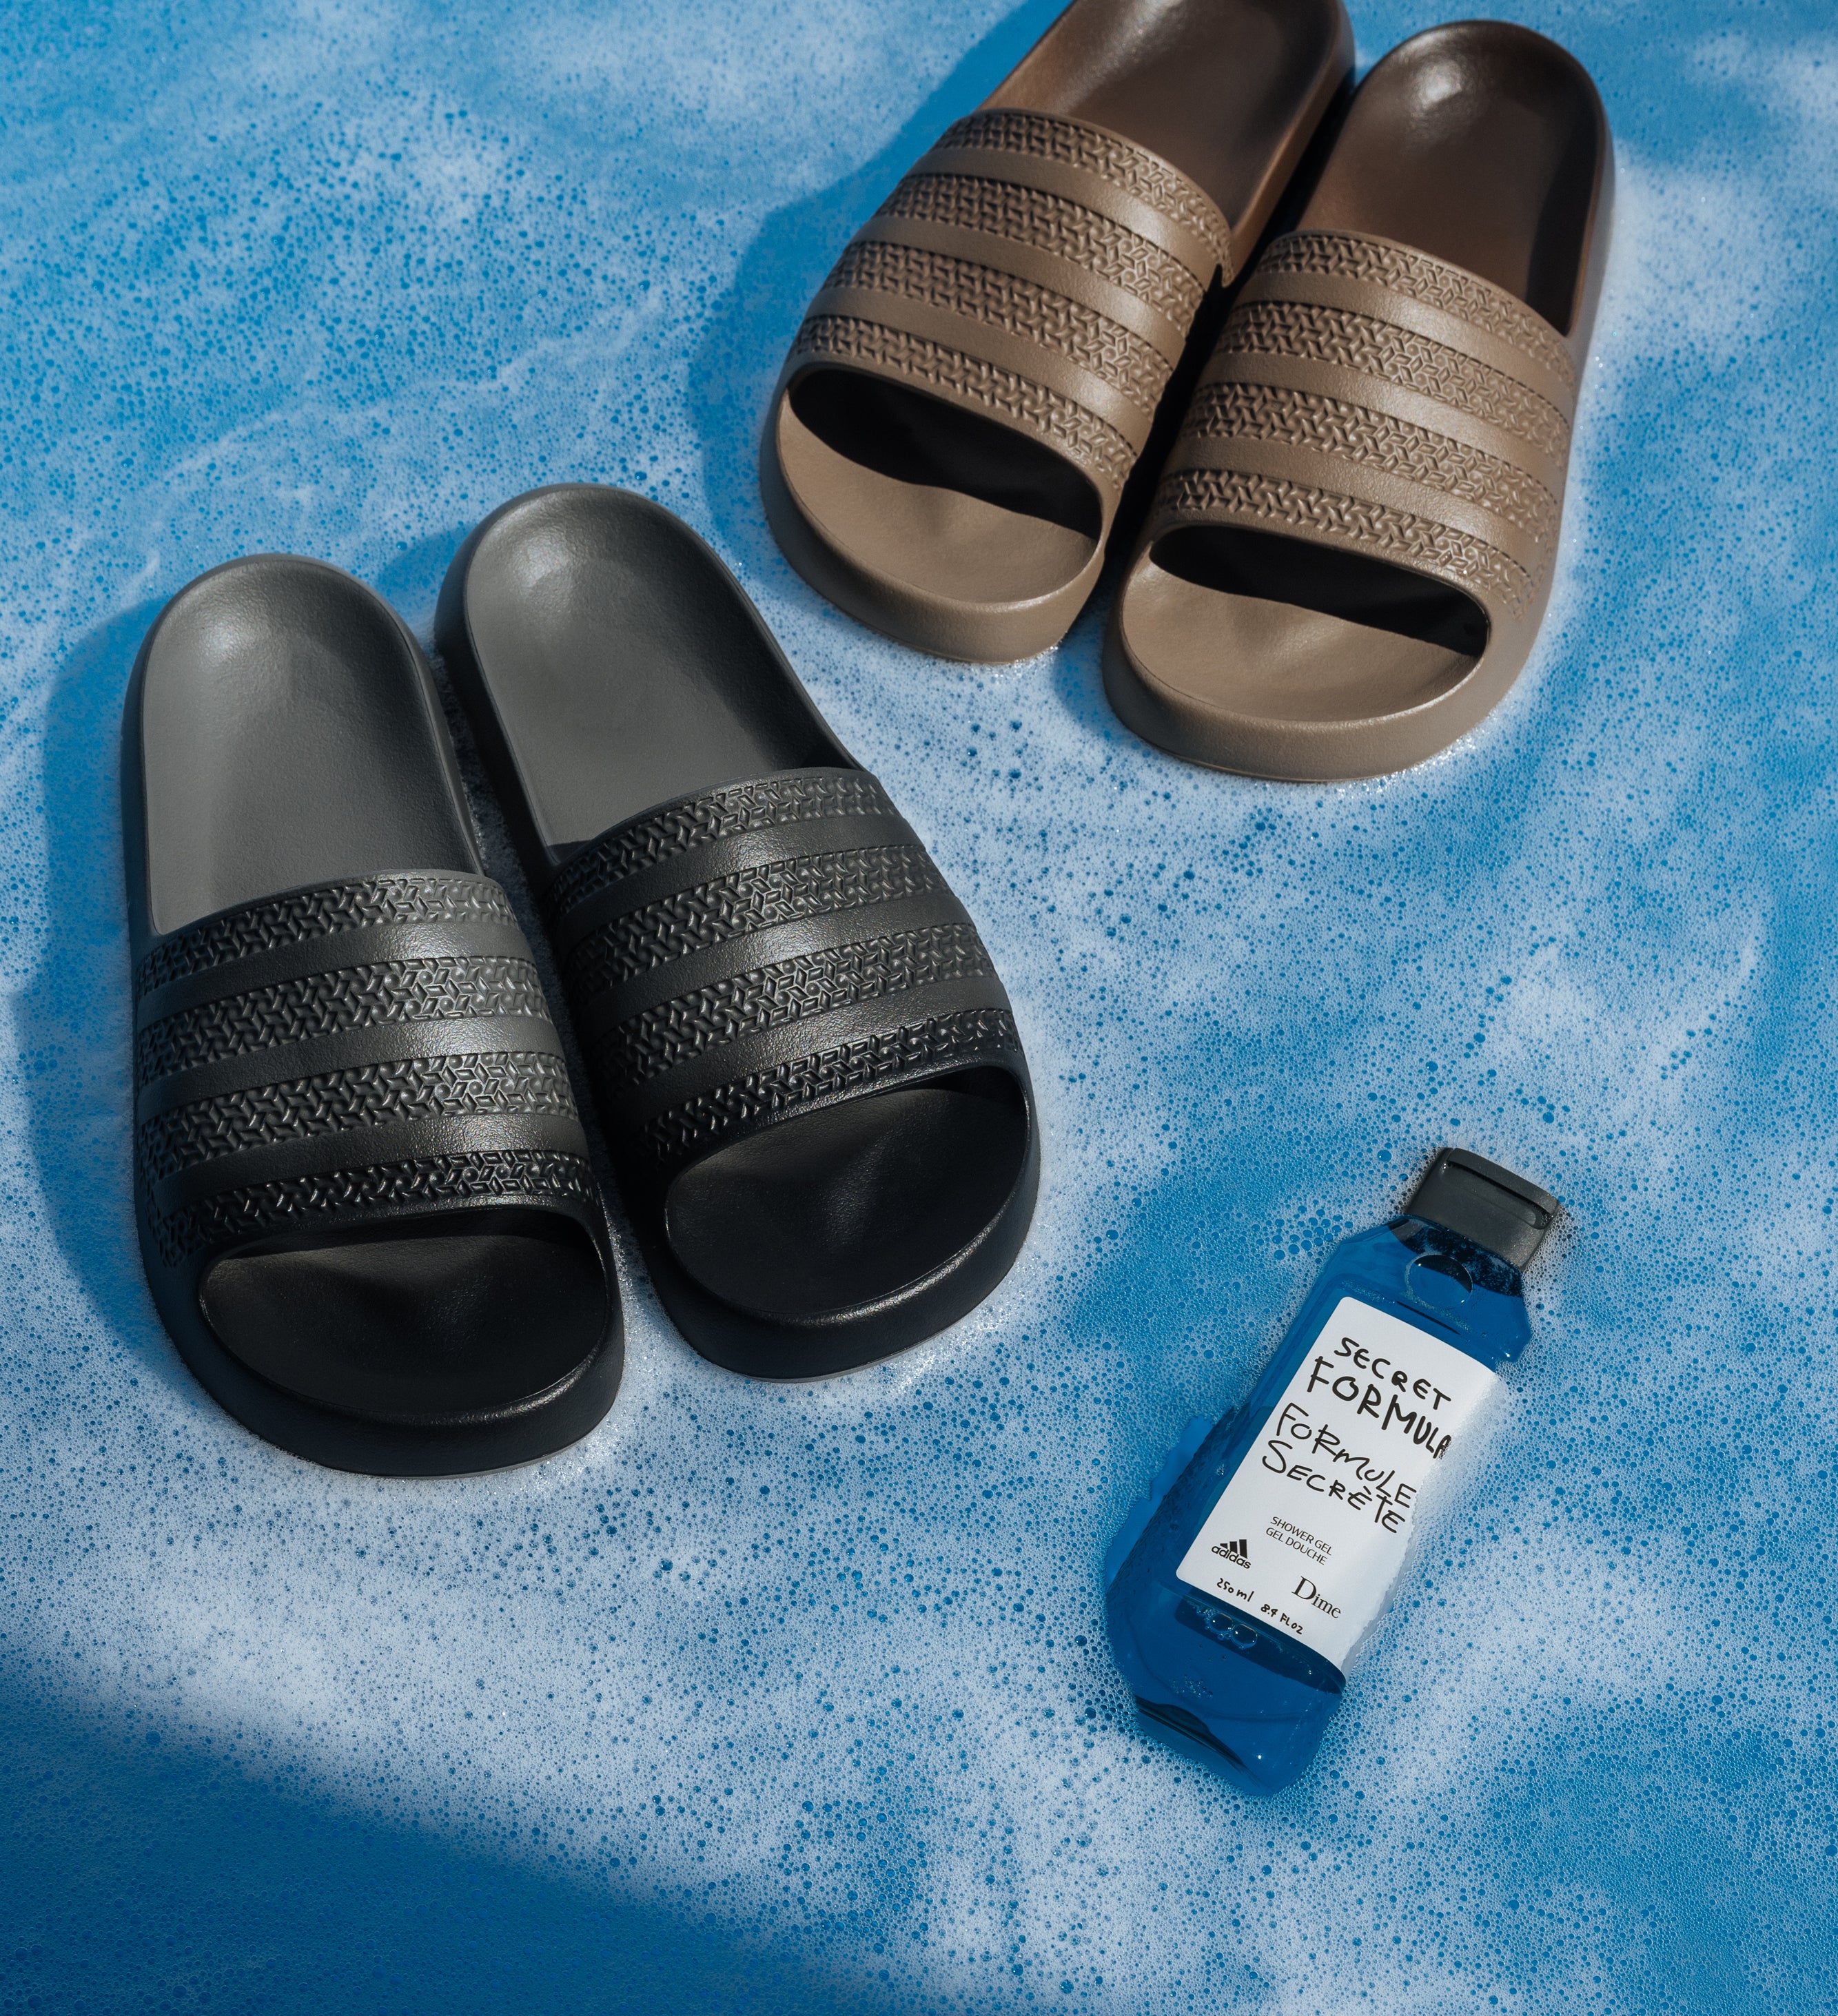 Four pairs of Adidas slides in shades of gray and brown are positioned on a textured blue surface, next to a bottle labeled &quot;SCETP for People Sickle.&quot;